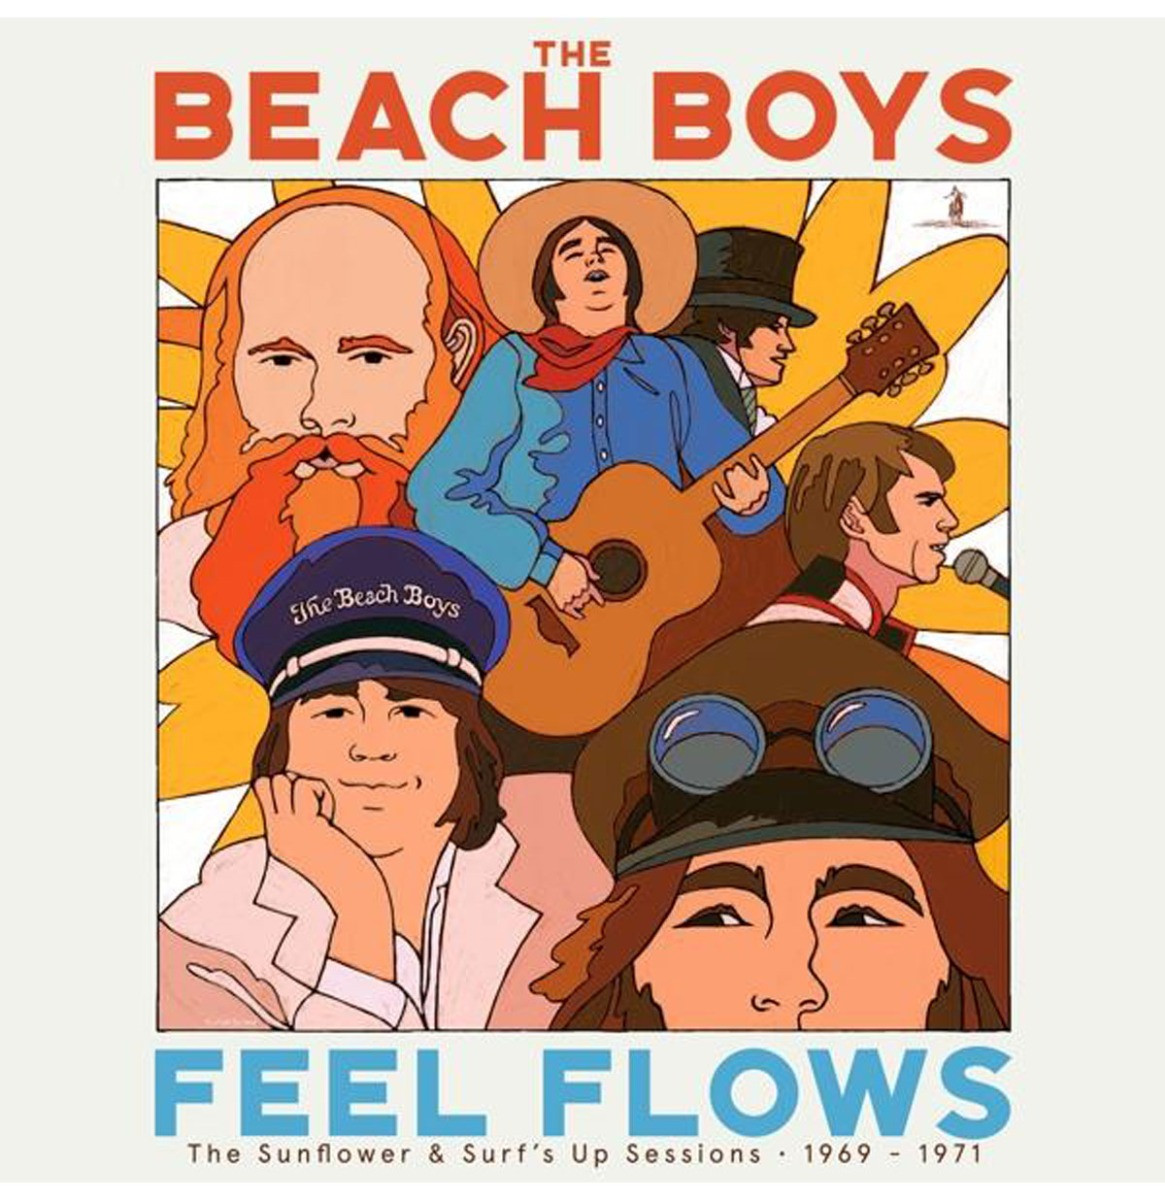 The Beach Boys - "Feel Flows" The Sunflower & Surf&apos;s Up Sessions 1969-1971 2LP